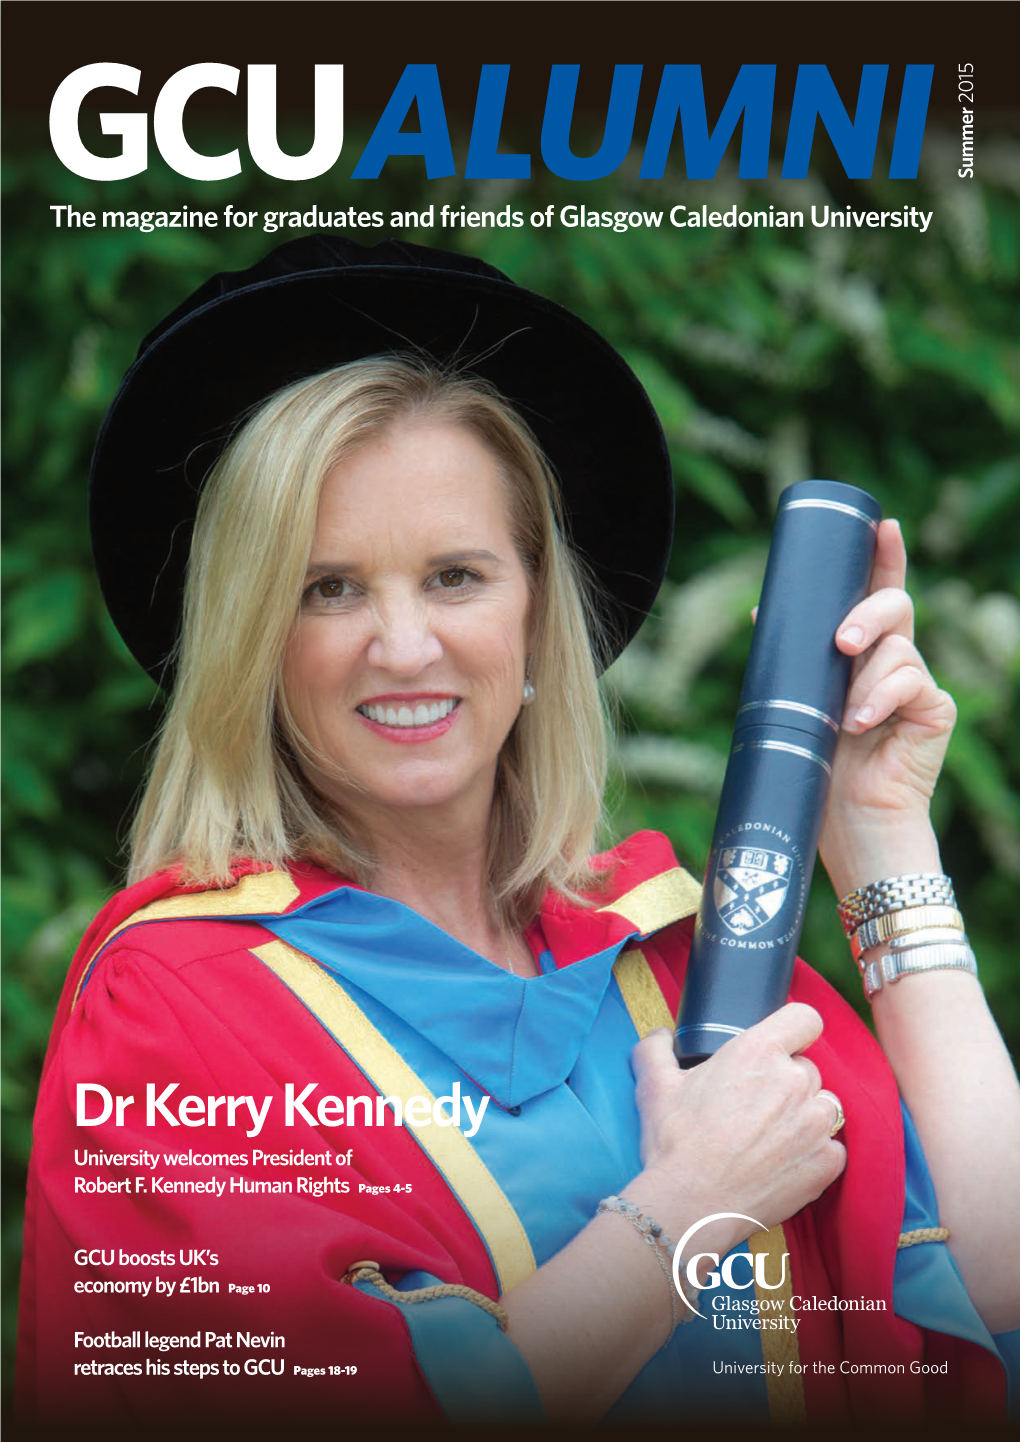 Dr Kerry Kennedy University Welcomes President of Robert F